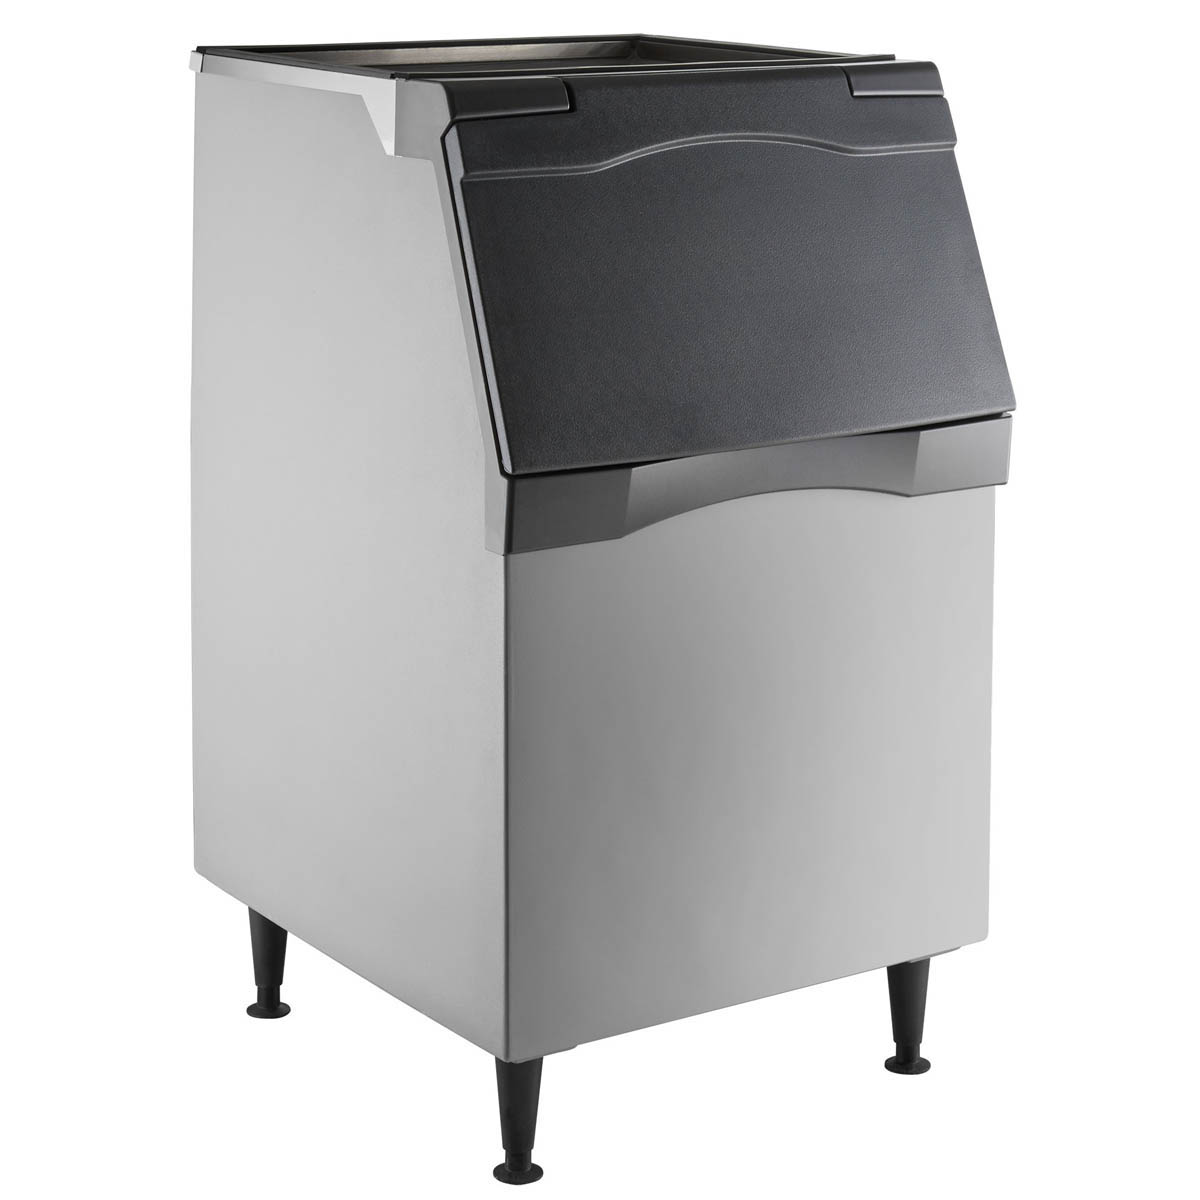 With Scotsman B530P Is An Effective Way To Keep Your Ice Supply Cool and Available, Chef's Deal